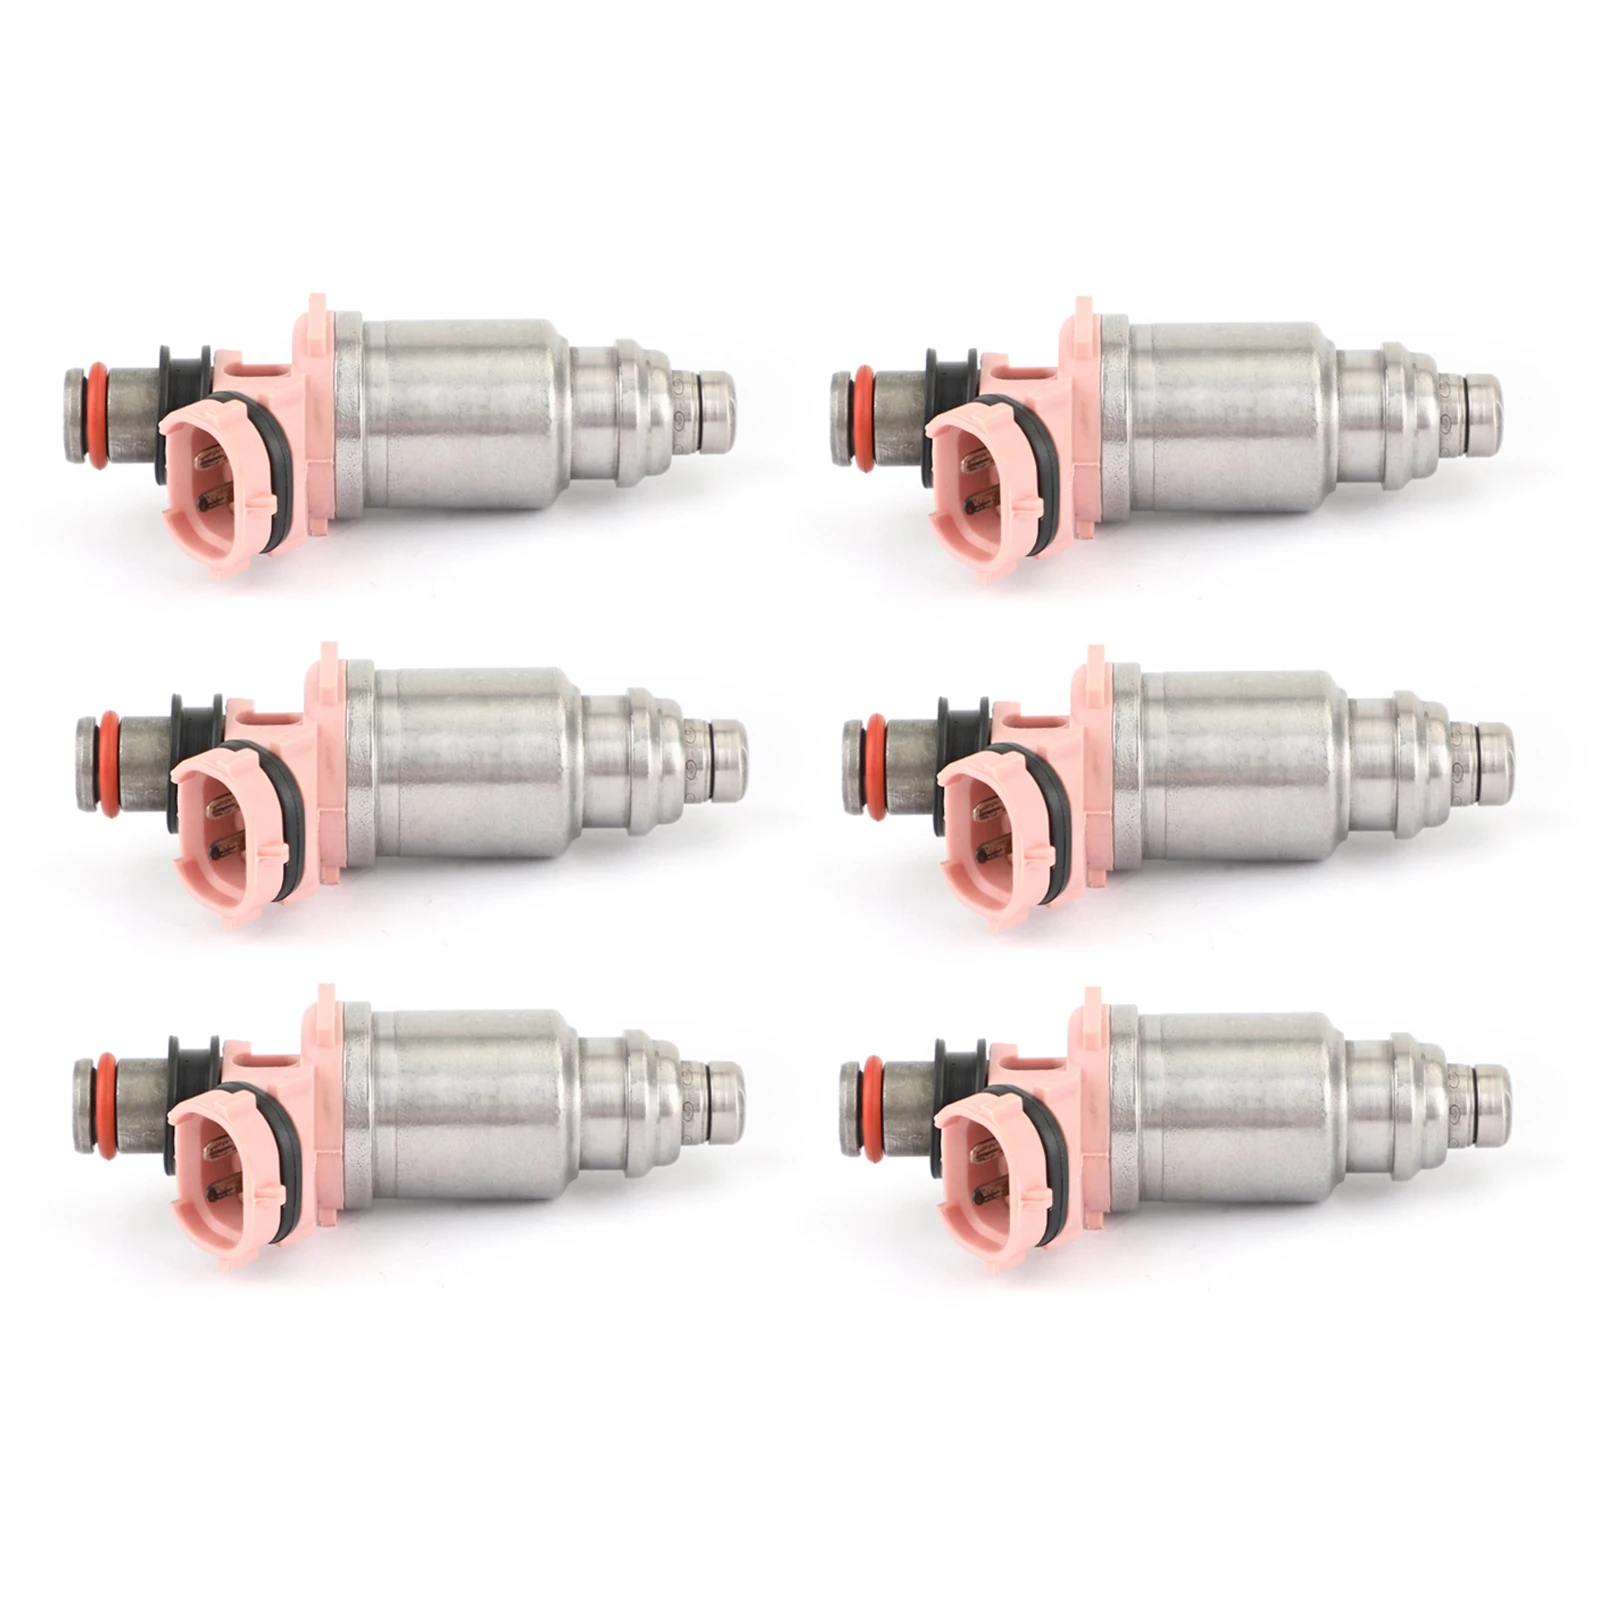 

Areyourshop 6pcs Fuel Injectors 23250-74080 Fit For Toyota Land Cruiser For Lexus 842-12131